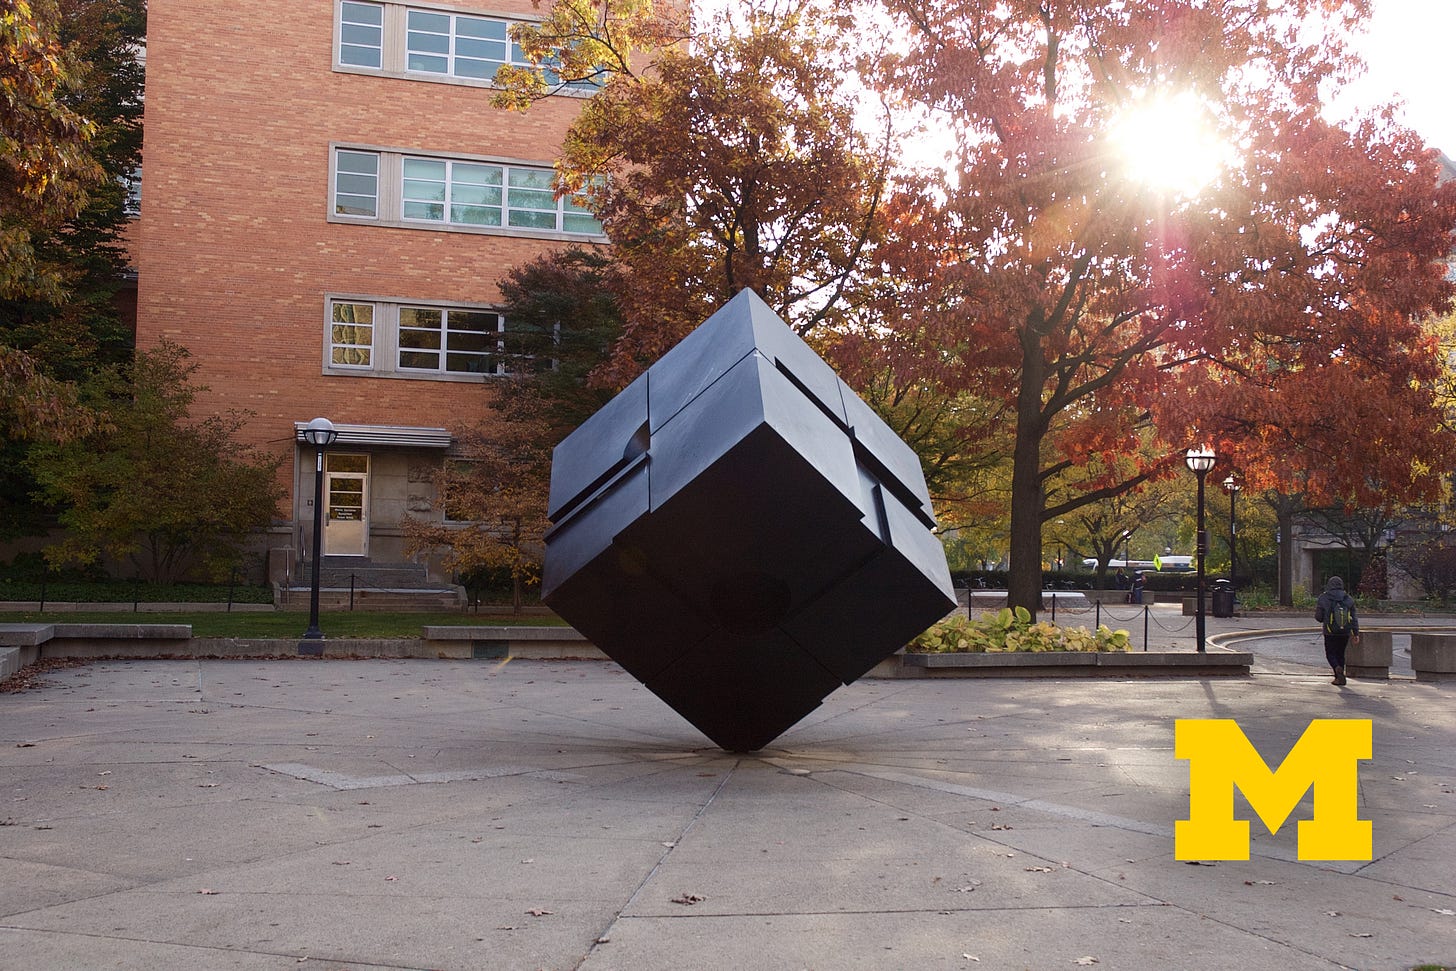 "The cube", a sculpture on the University of Michigan campus, is a cube resting on one point.